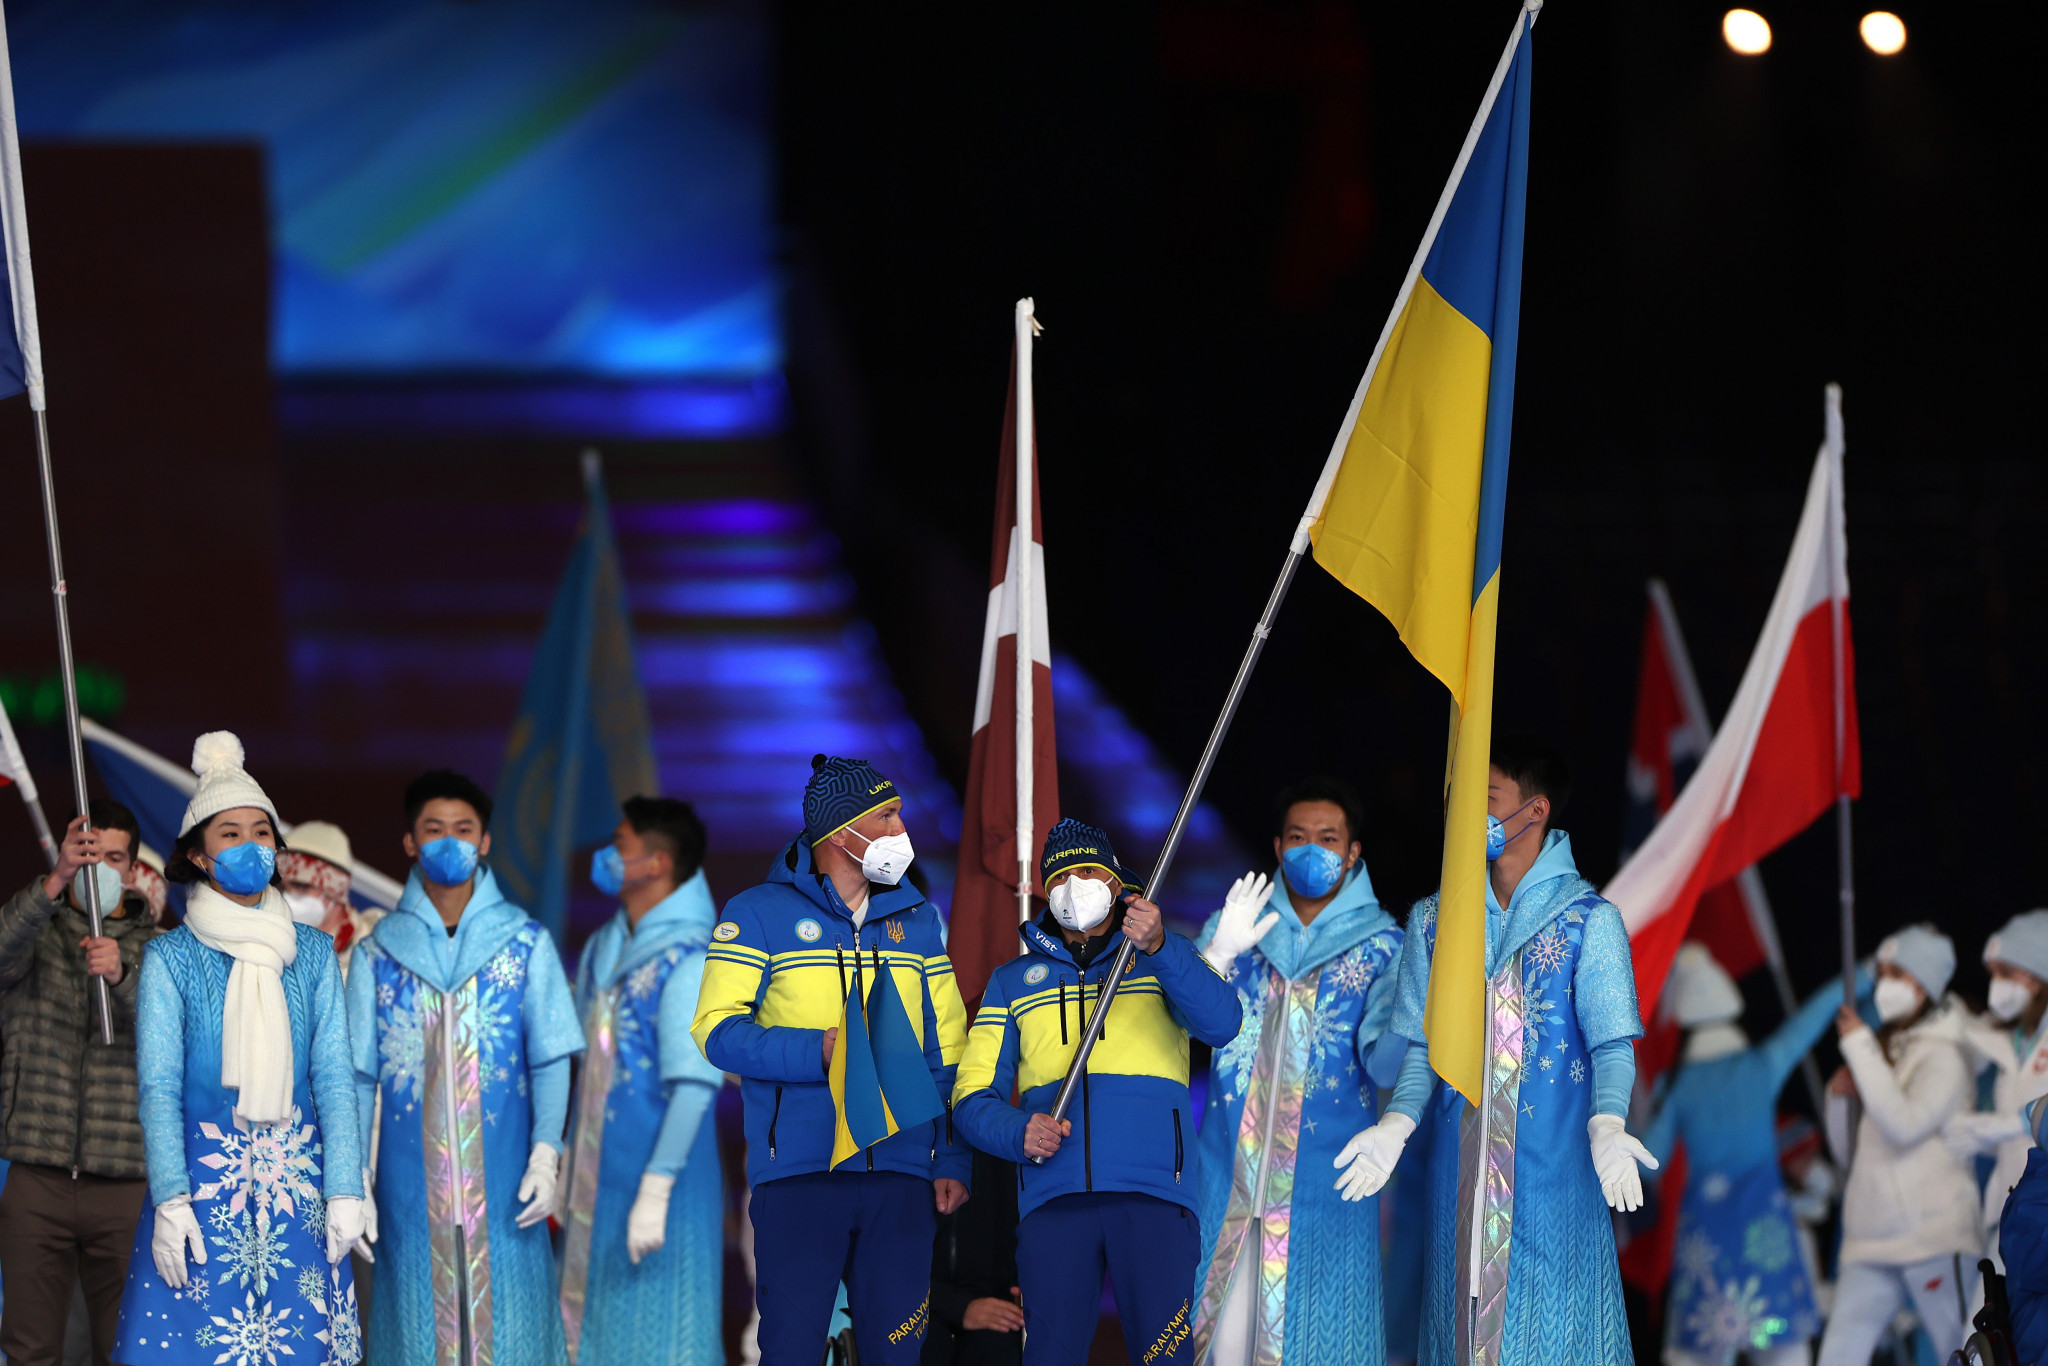 Ukrainian biathlete Vitalii Lukianenko, who achieved two golds and one silver at Beijing 2022, carried his nation's flag ©Getty Images